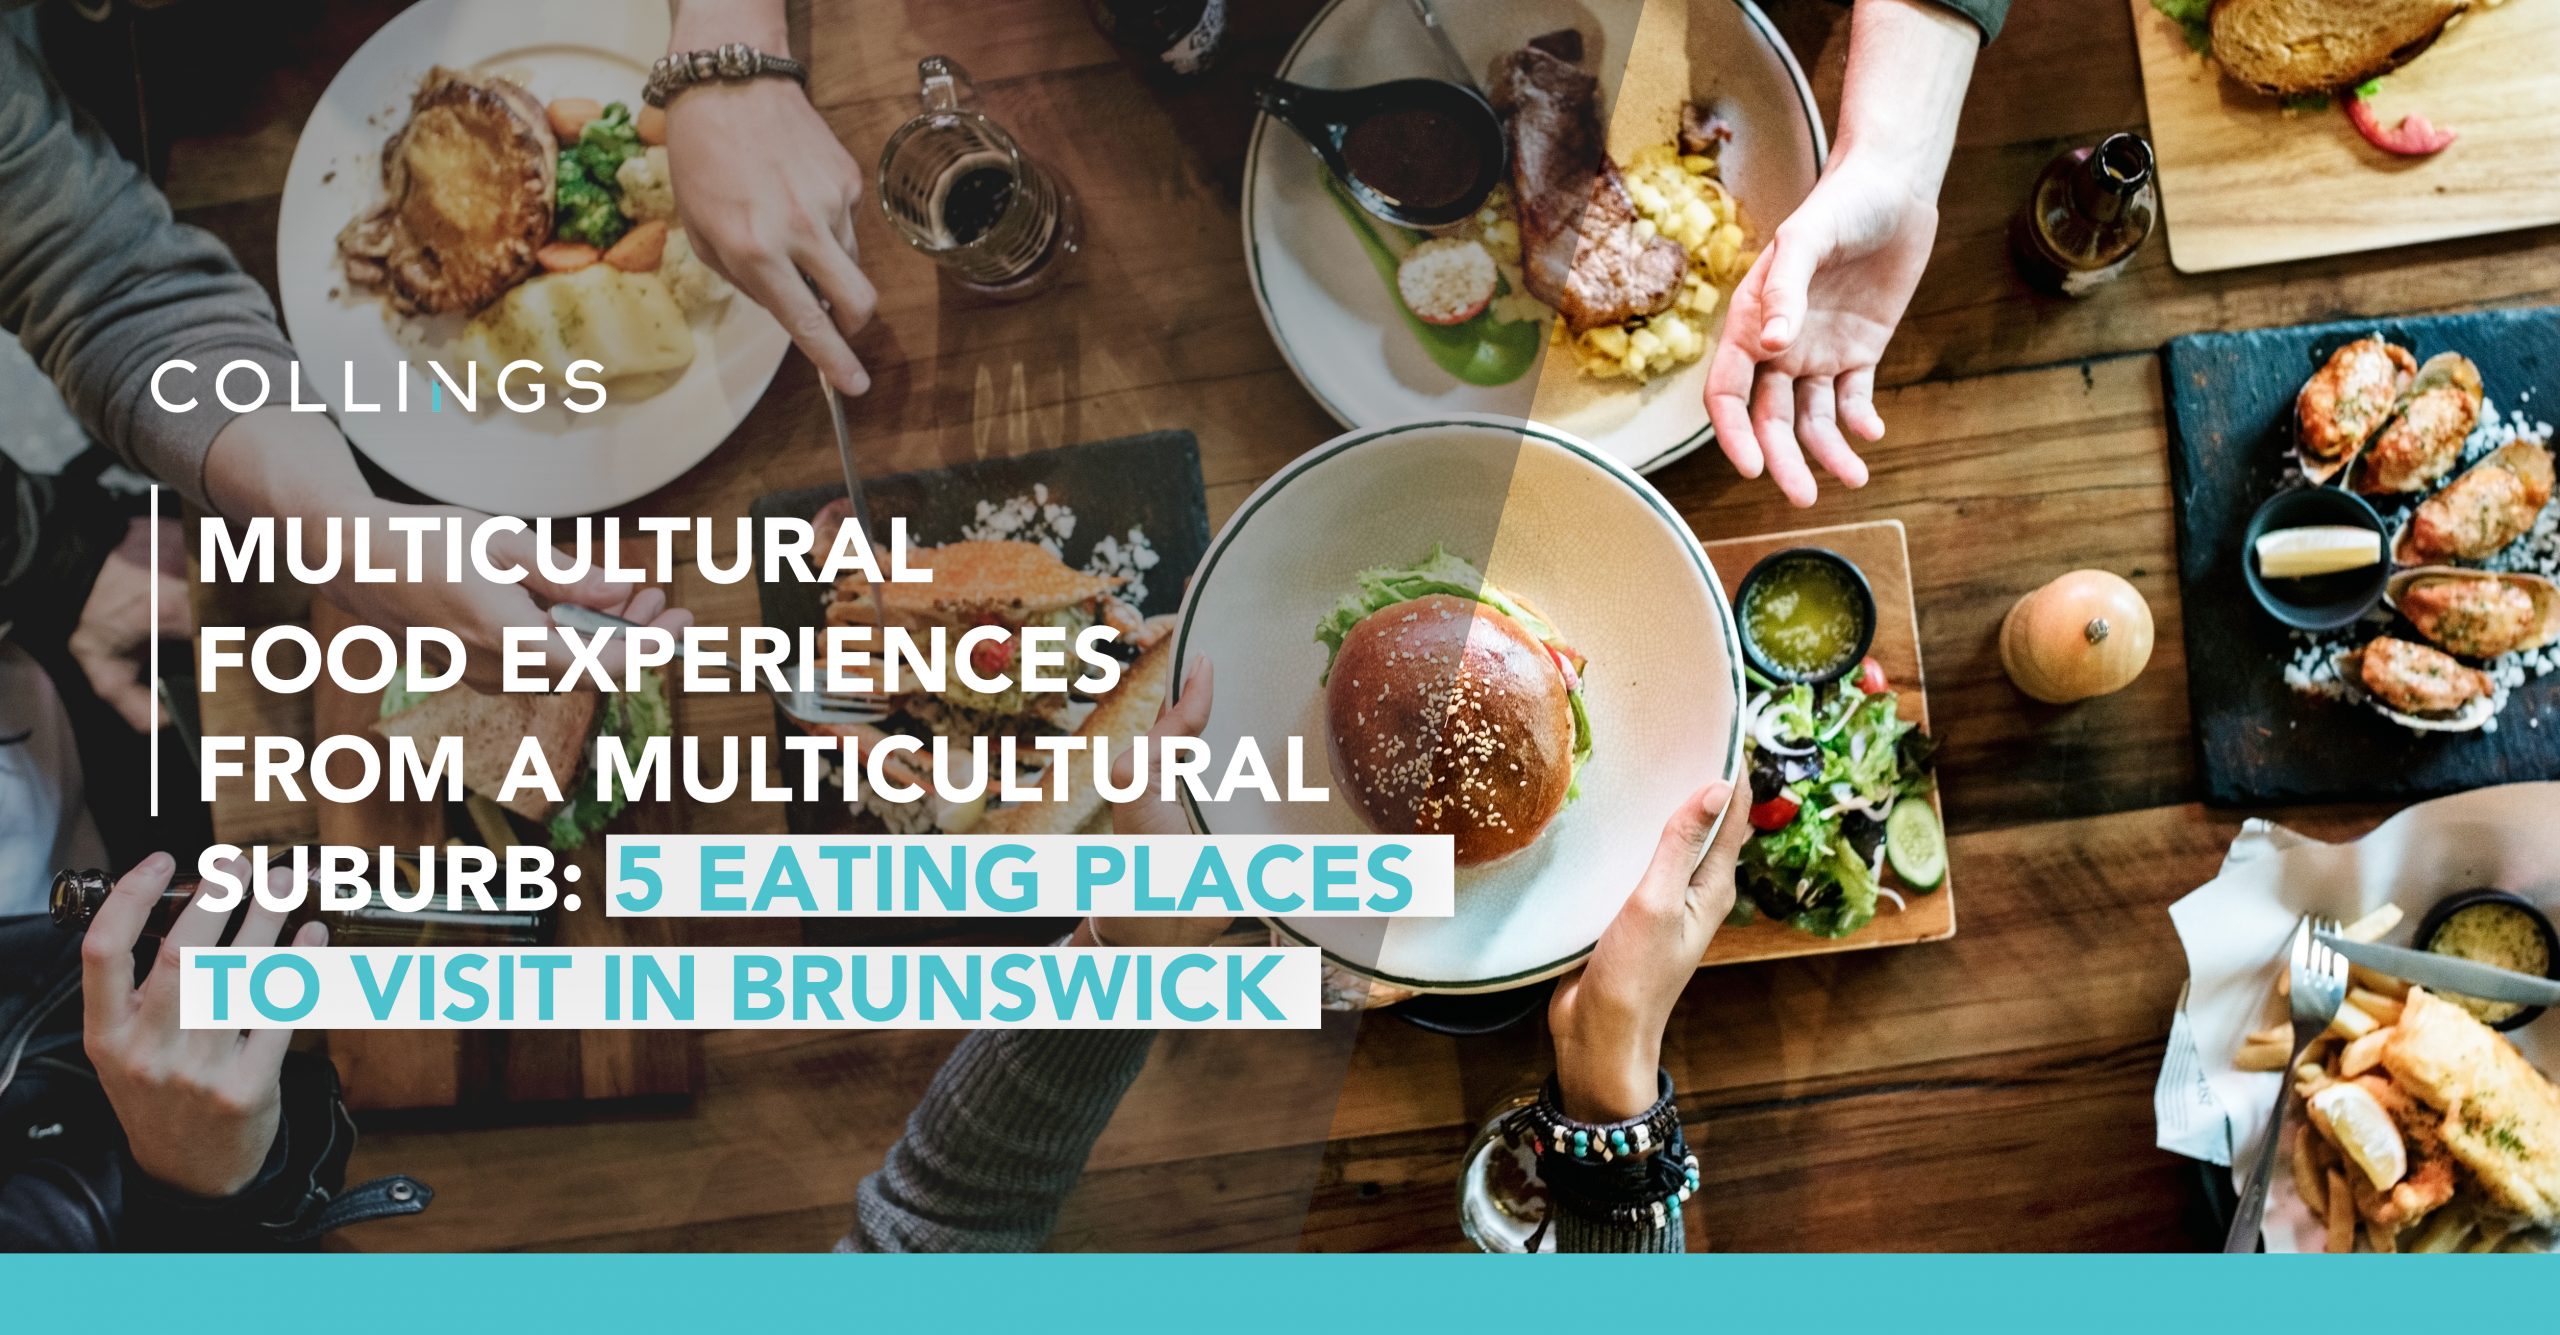 Multicultural Food Experiences From a Multicultural Suburb: 5 Eating Places to Visit in Brunswick